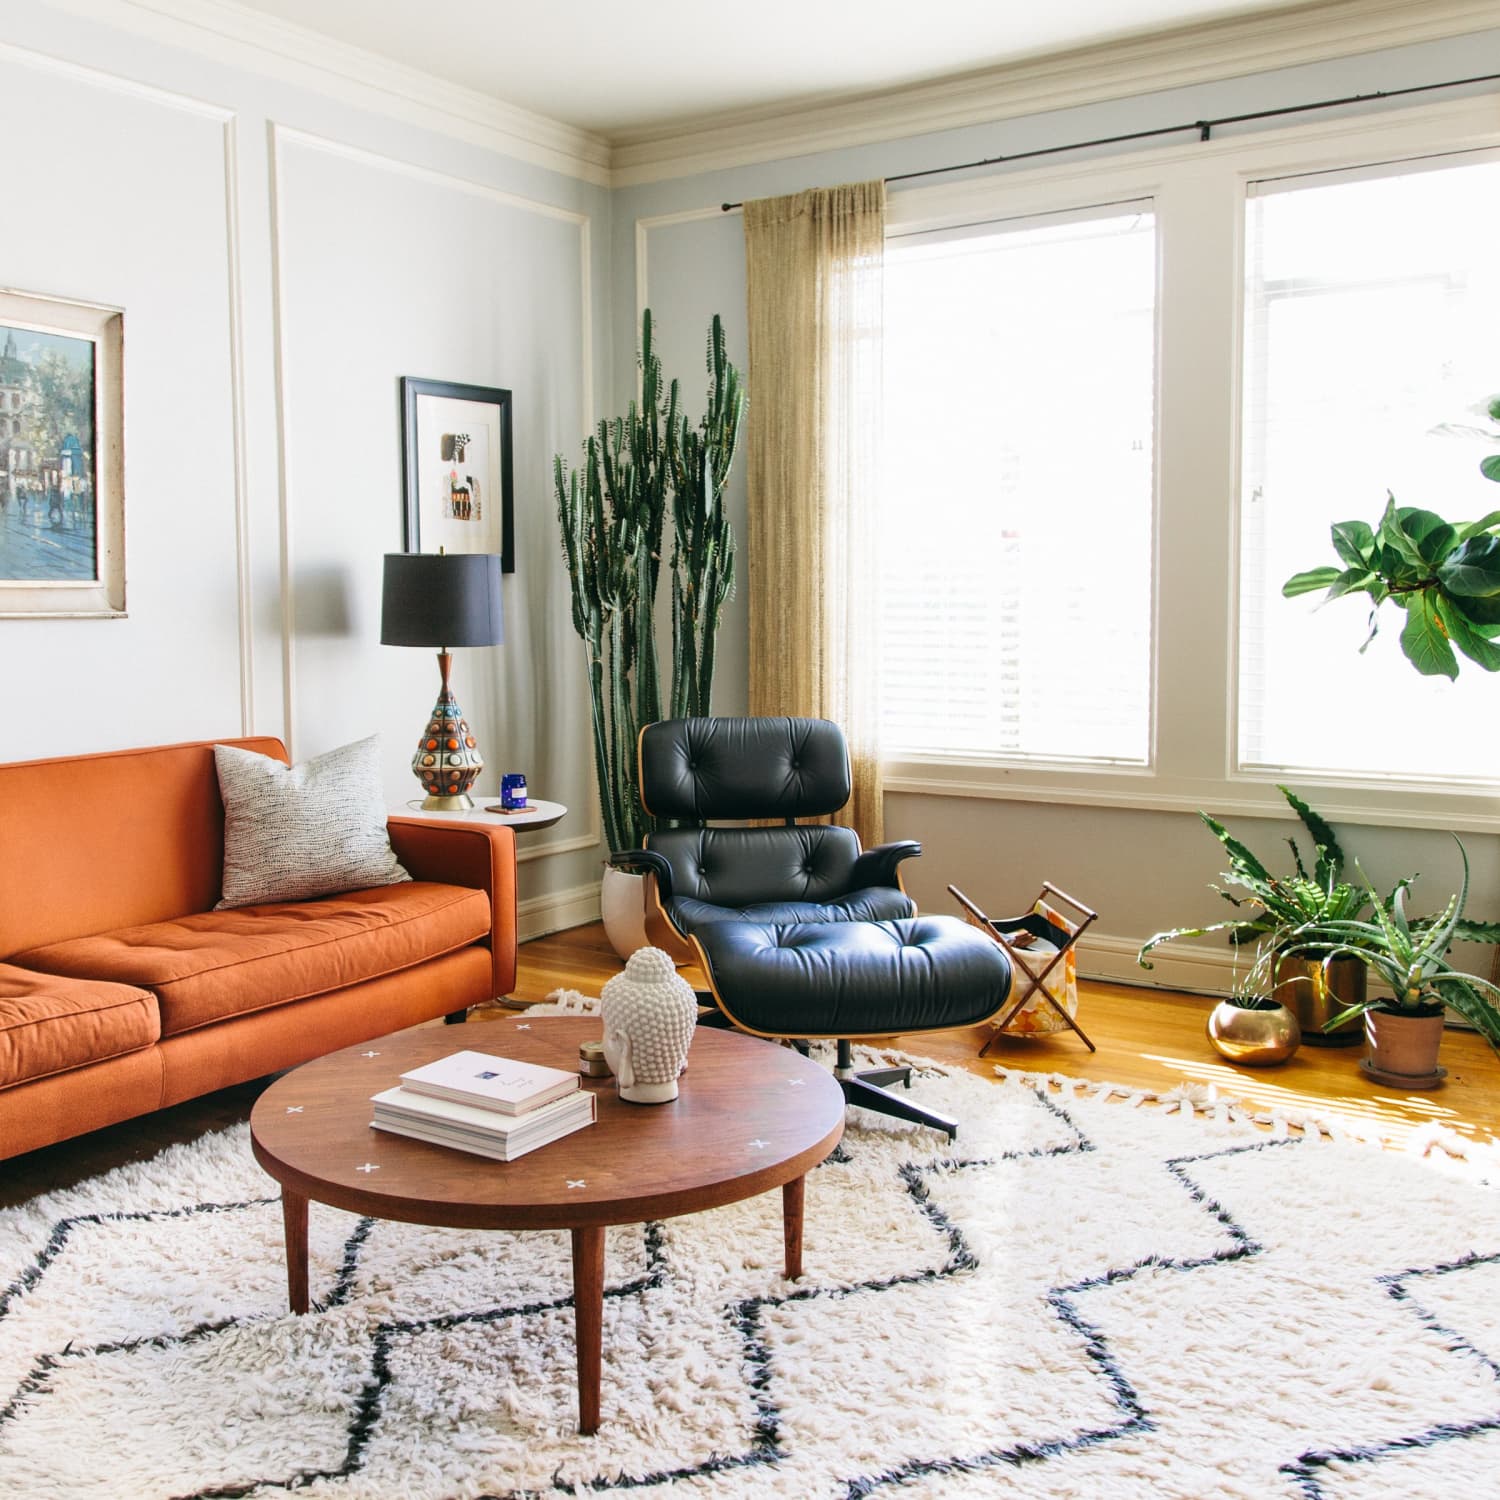 How to incorporate mid century modern decor on a budget